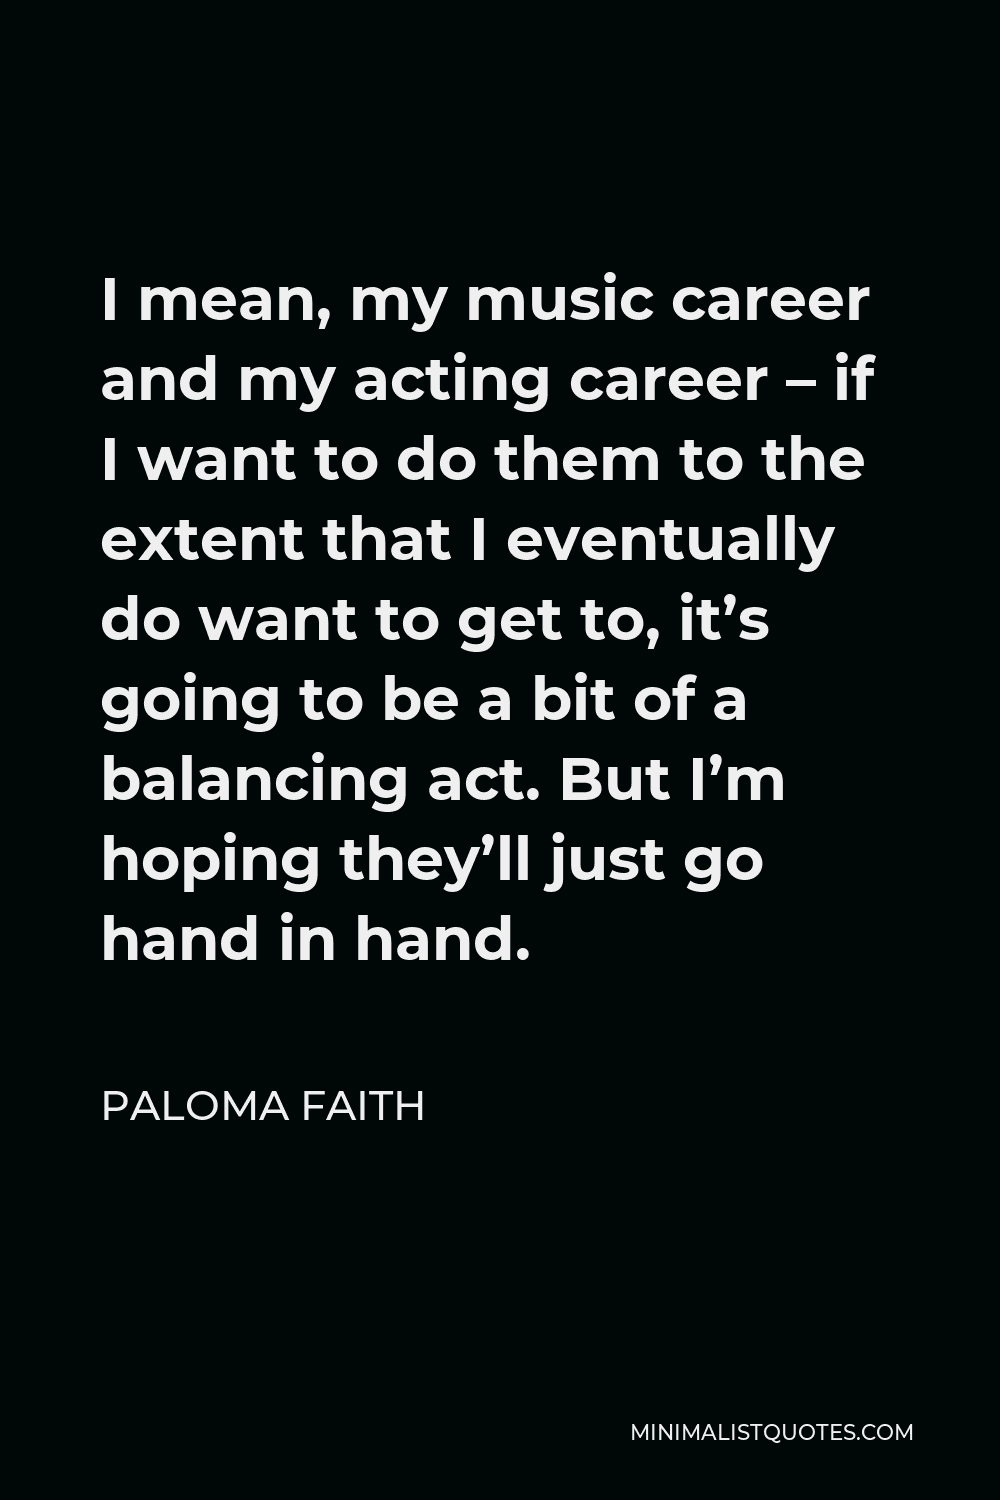 Paloma Faith Quote - I mean, my music career and my acting career – if I want to do them to the extent that I eventually do want to get to, it’s going to be a bit of a balancing act. But I’m hoping they’ll just go hand in hand.